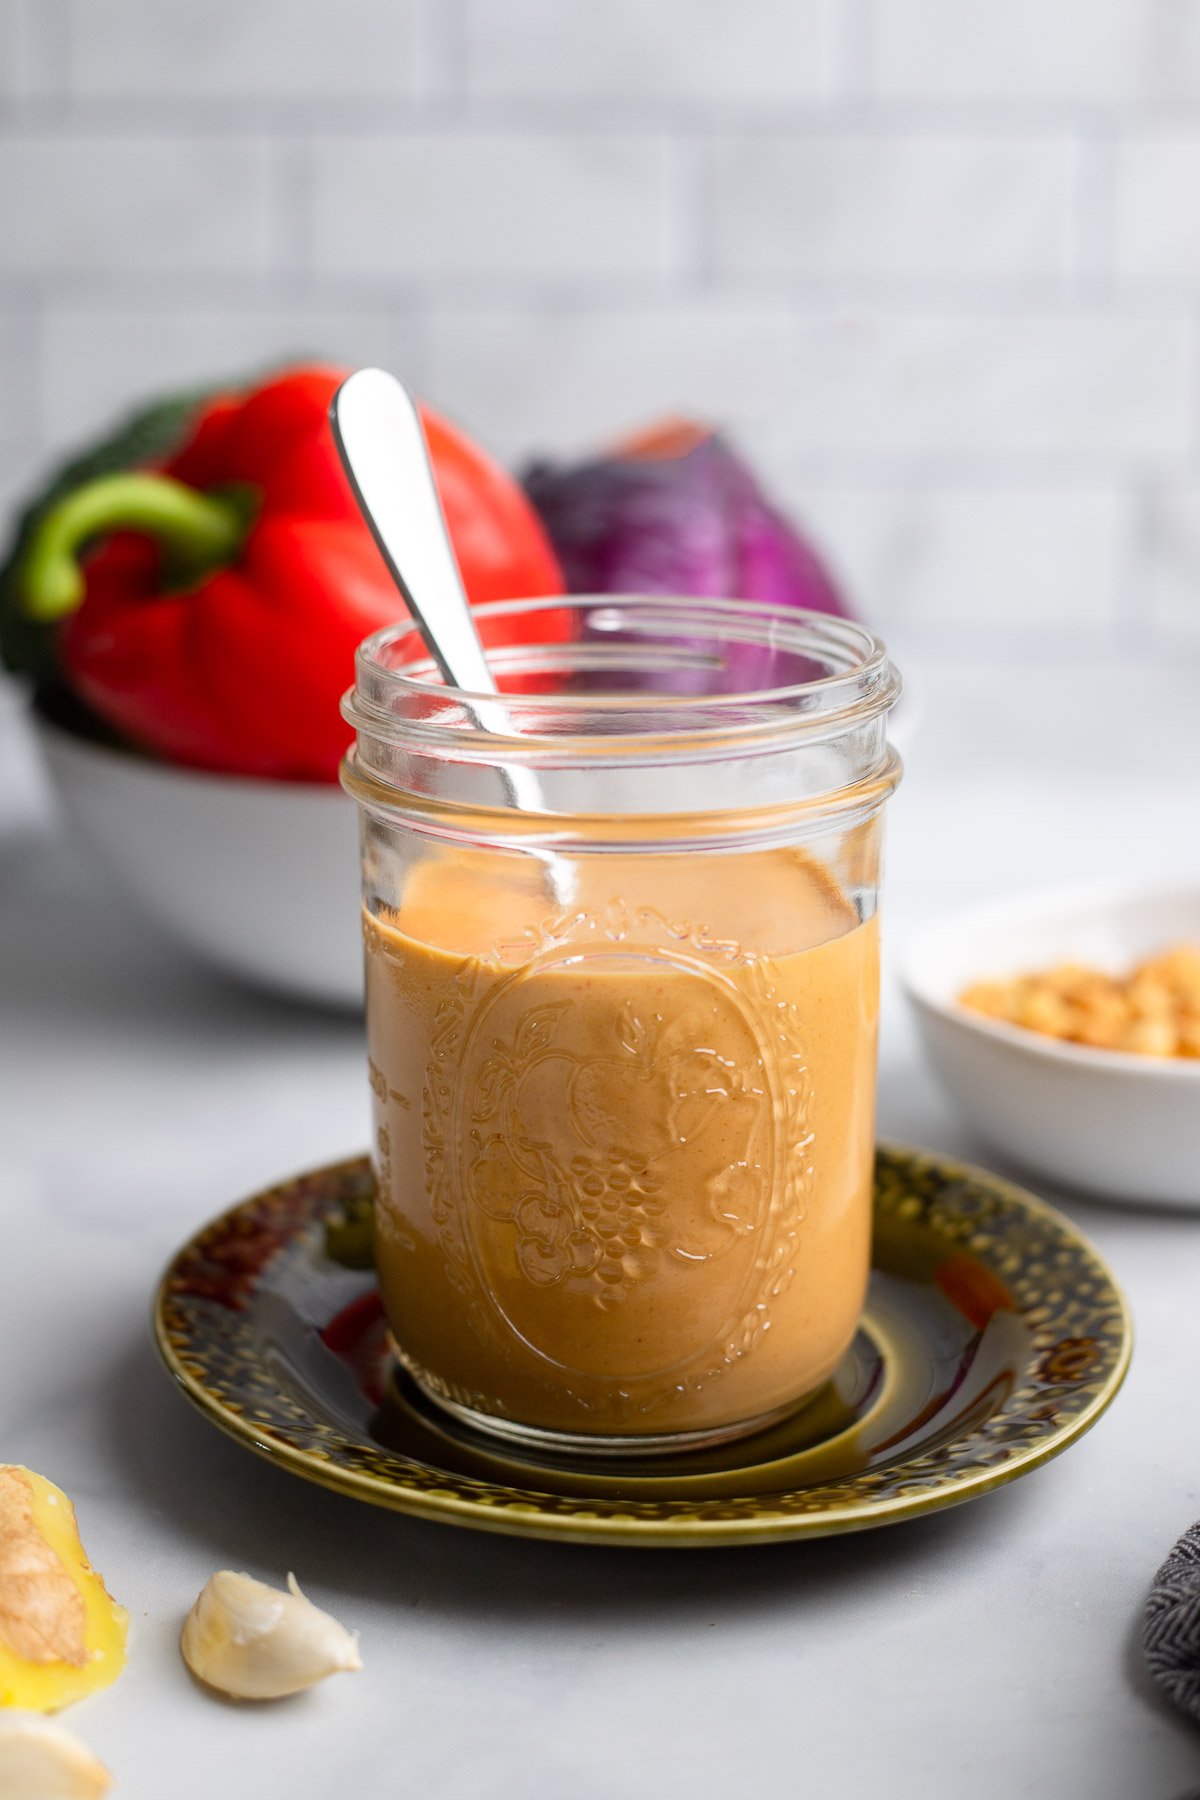 peanut butter stir fry sauce in a glass jar with a spoon.